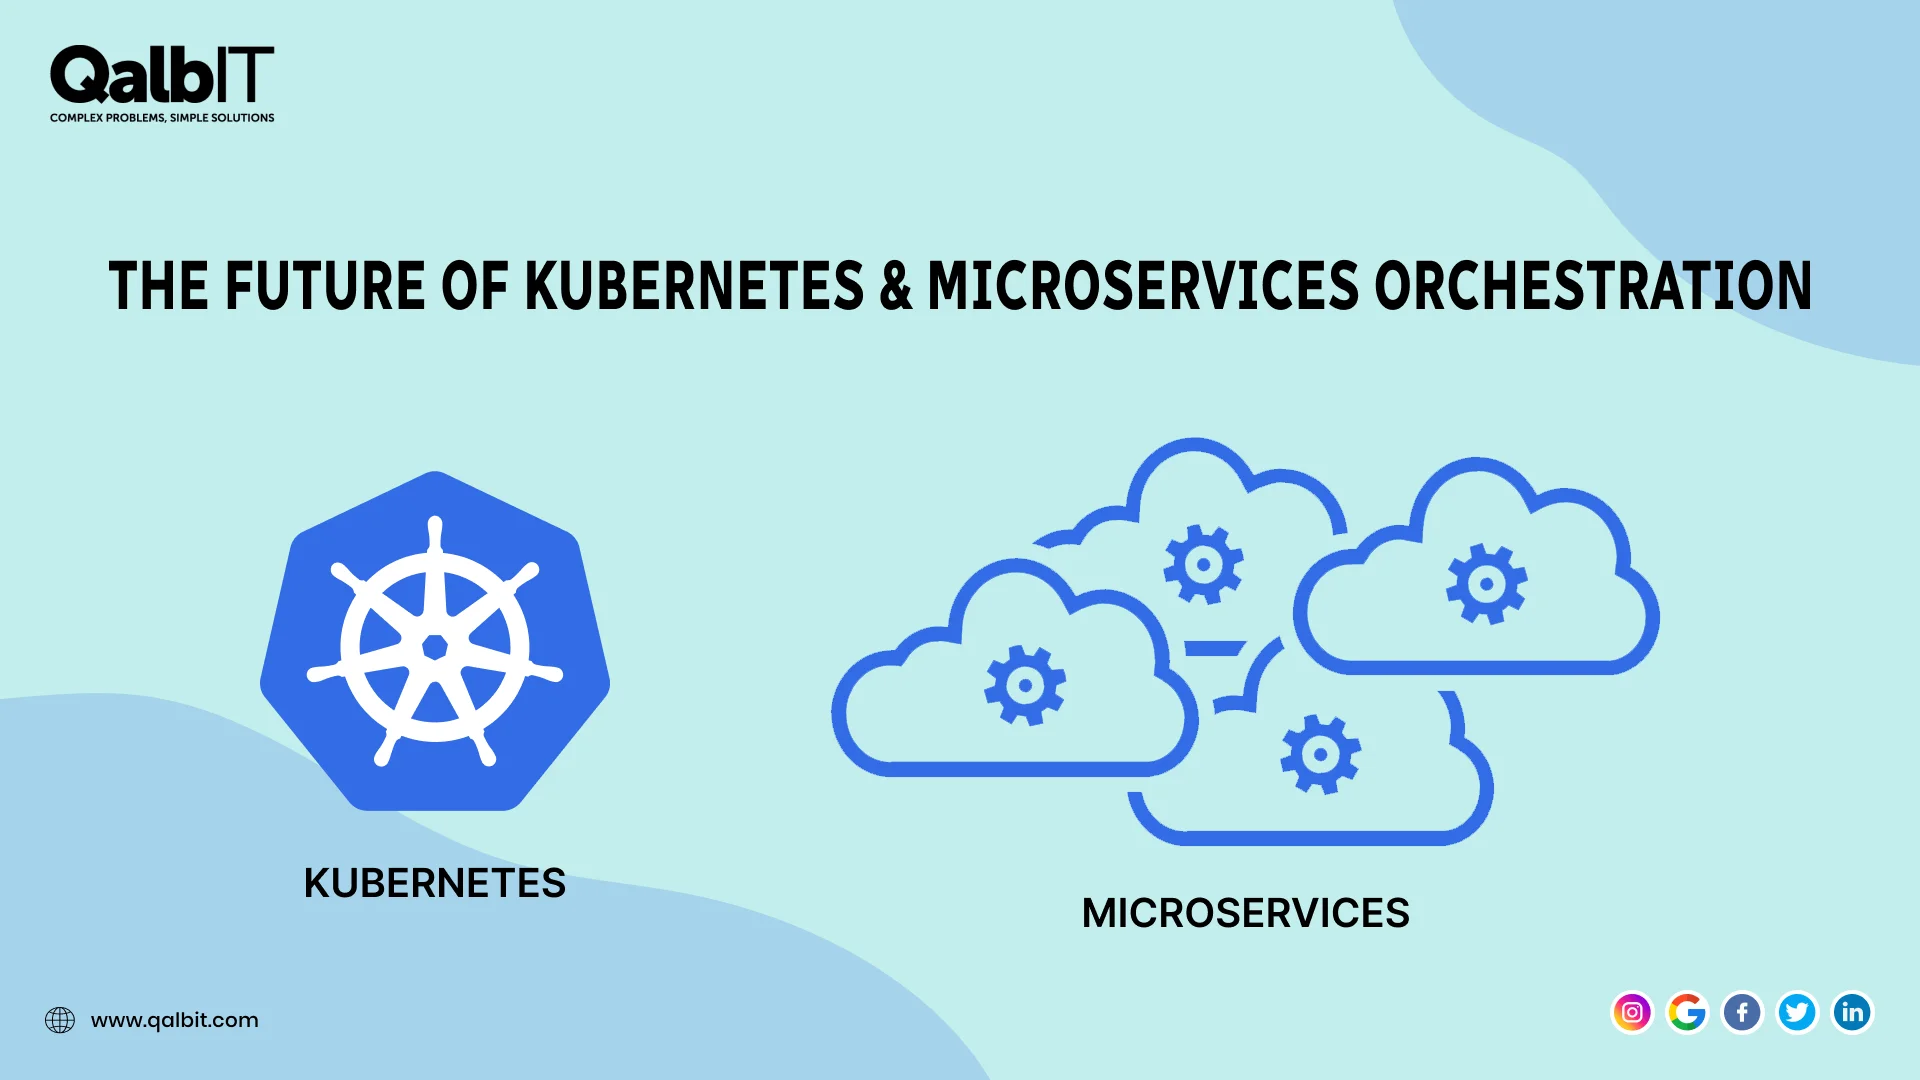 The Future of Kubernetes & Microservices Orchestration